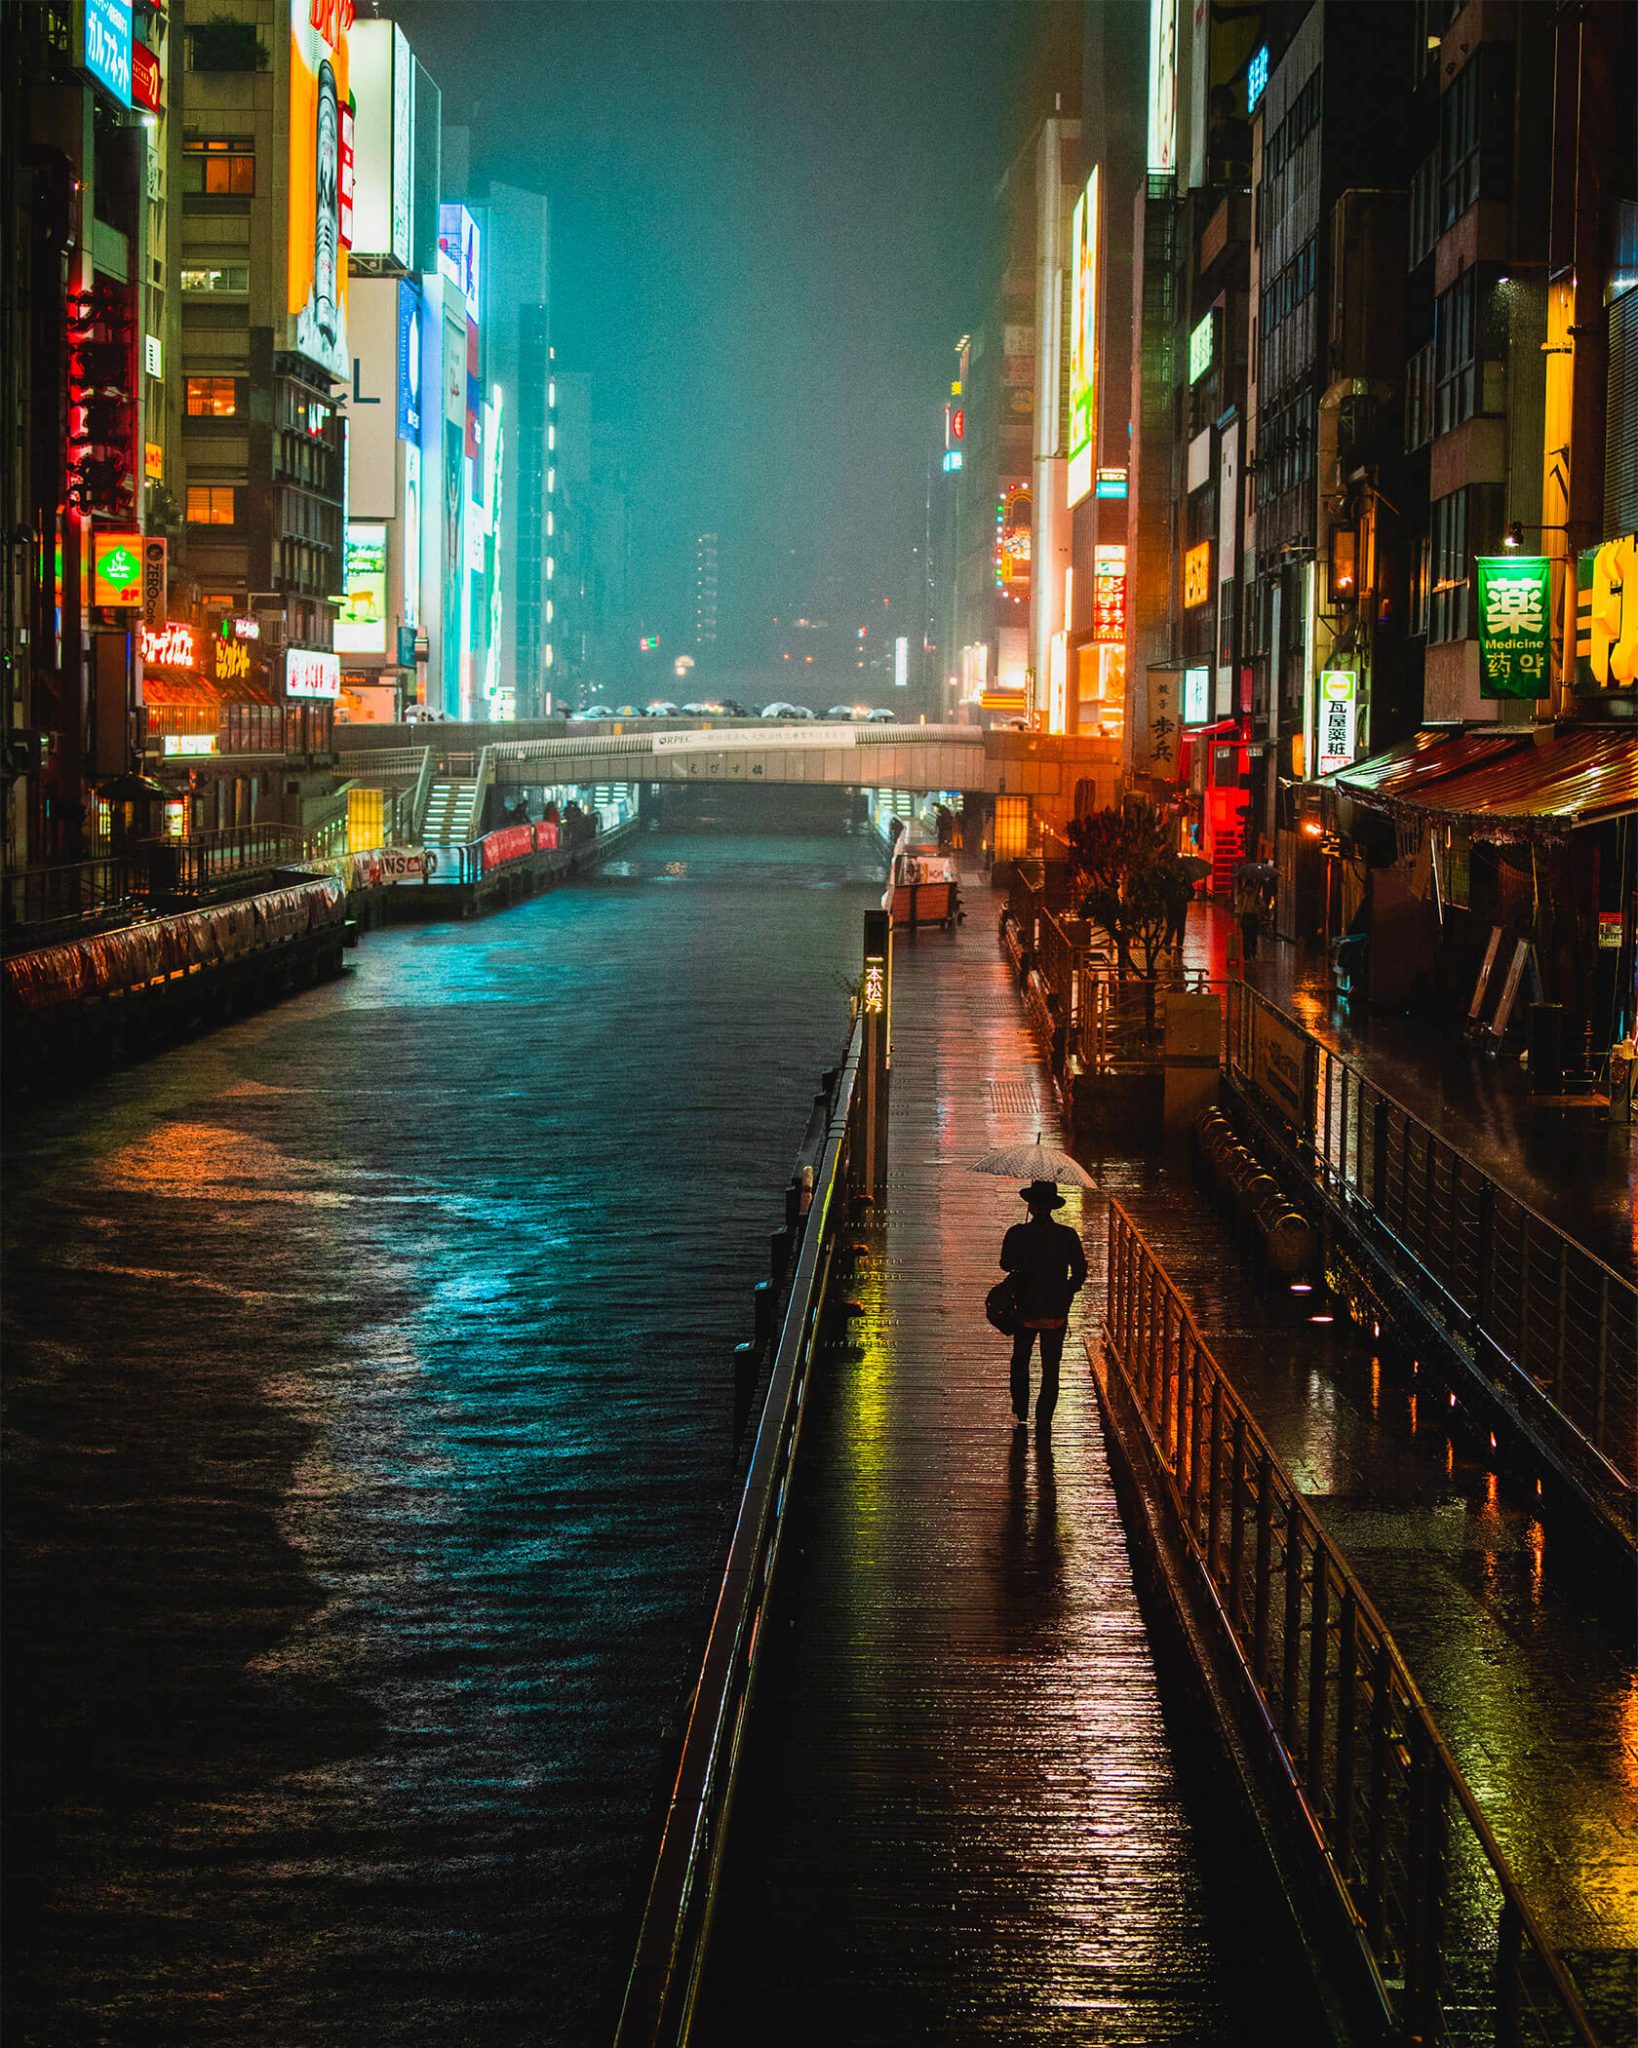 Reflective City: Photo Series by Omi Kim | Daily design inspiration for ...